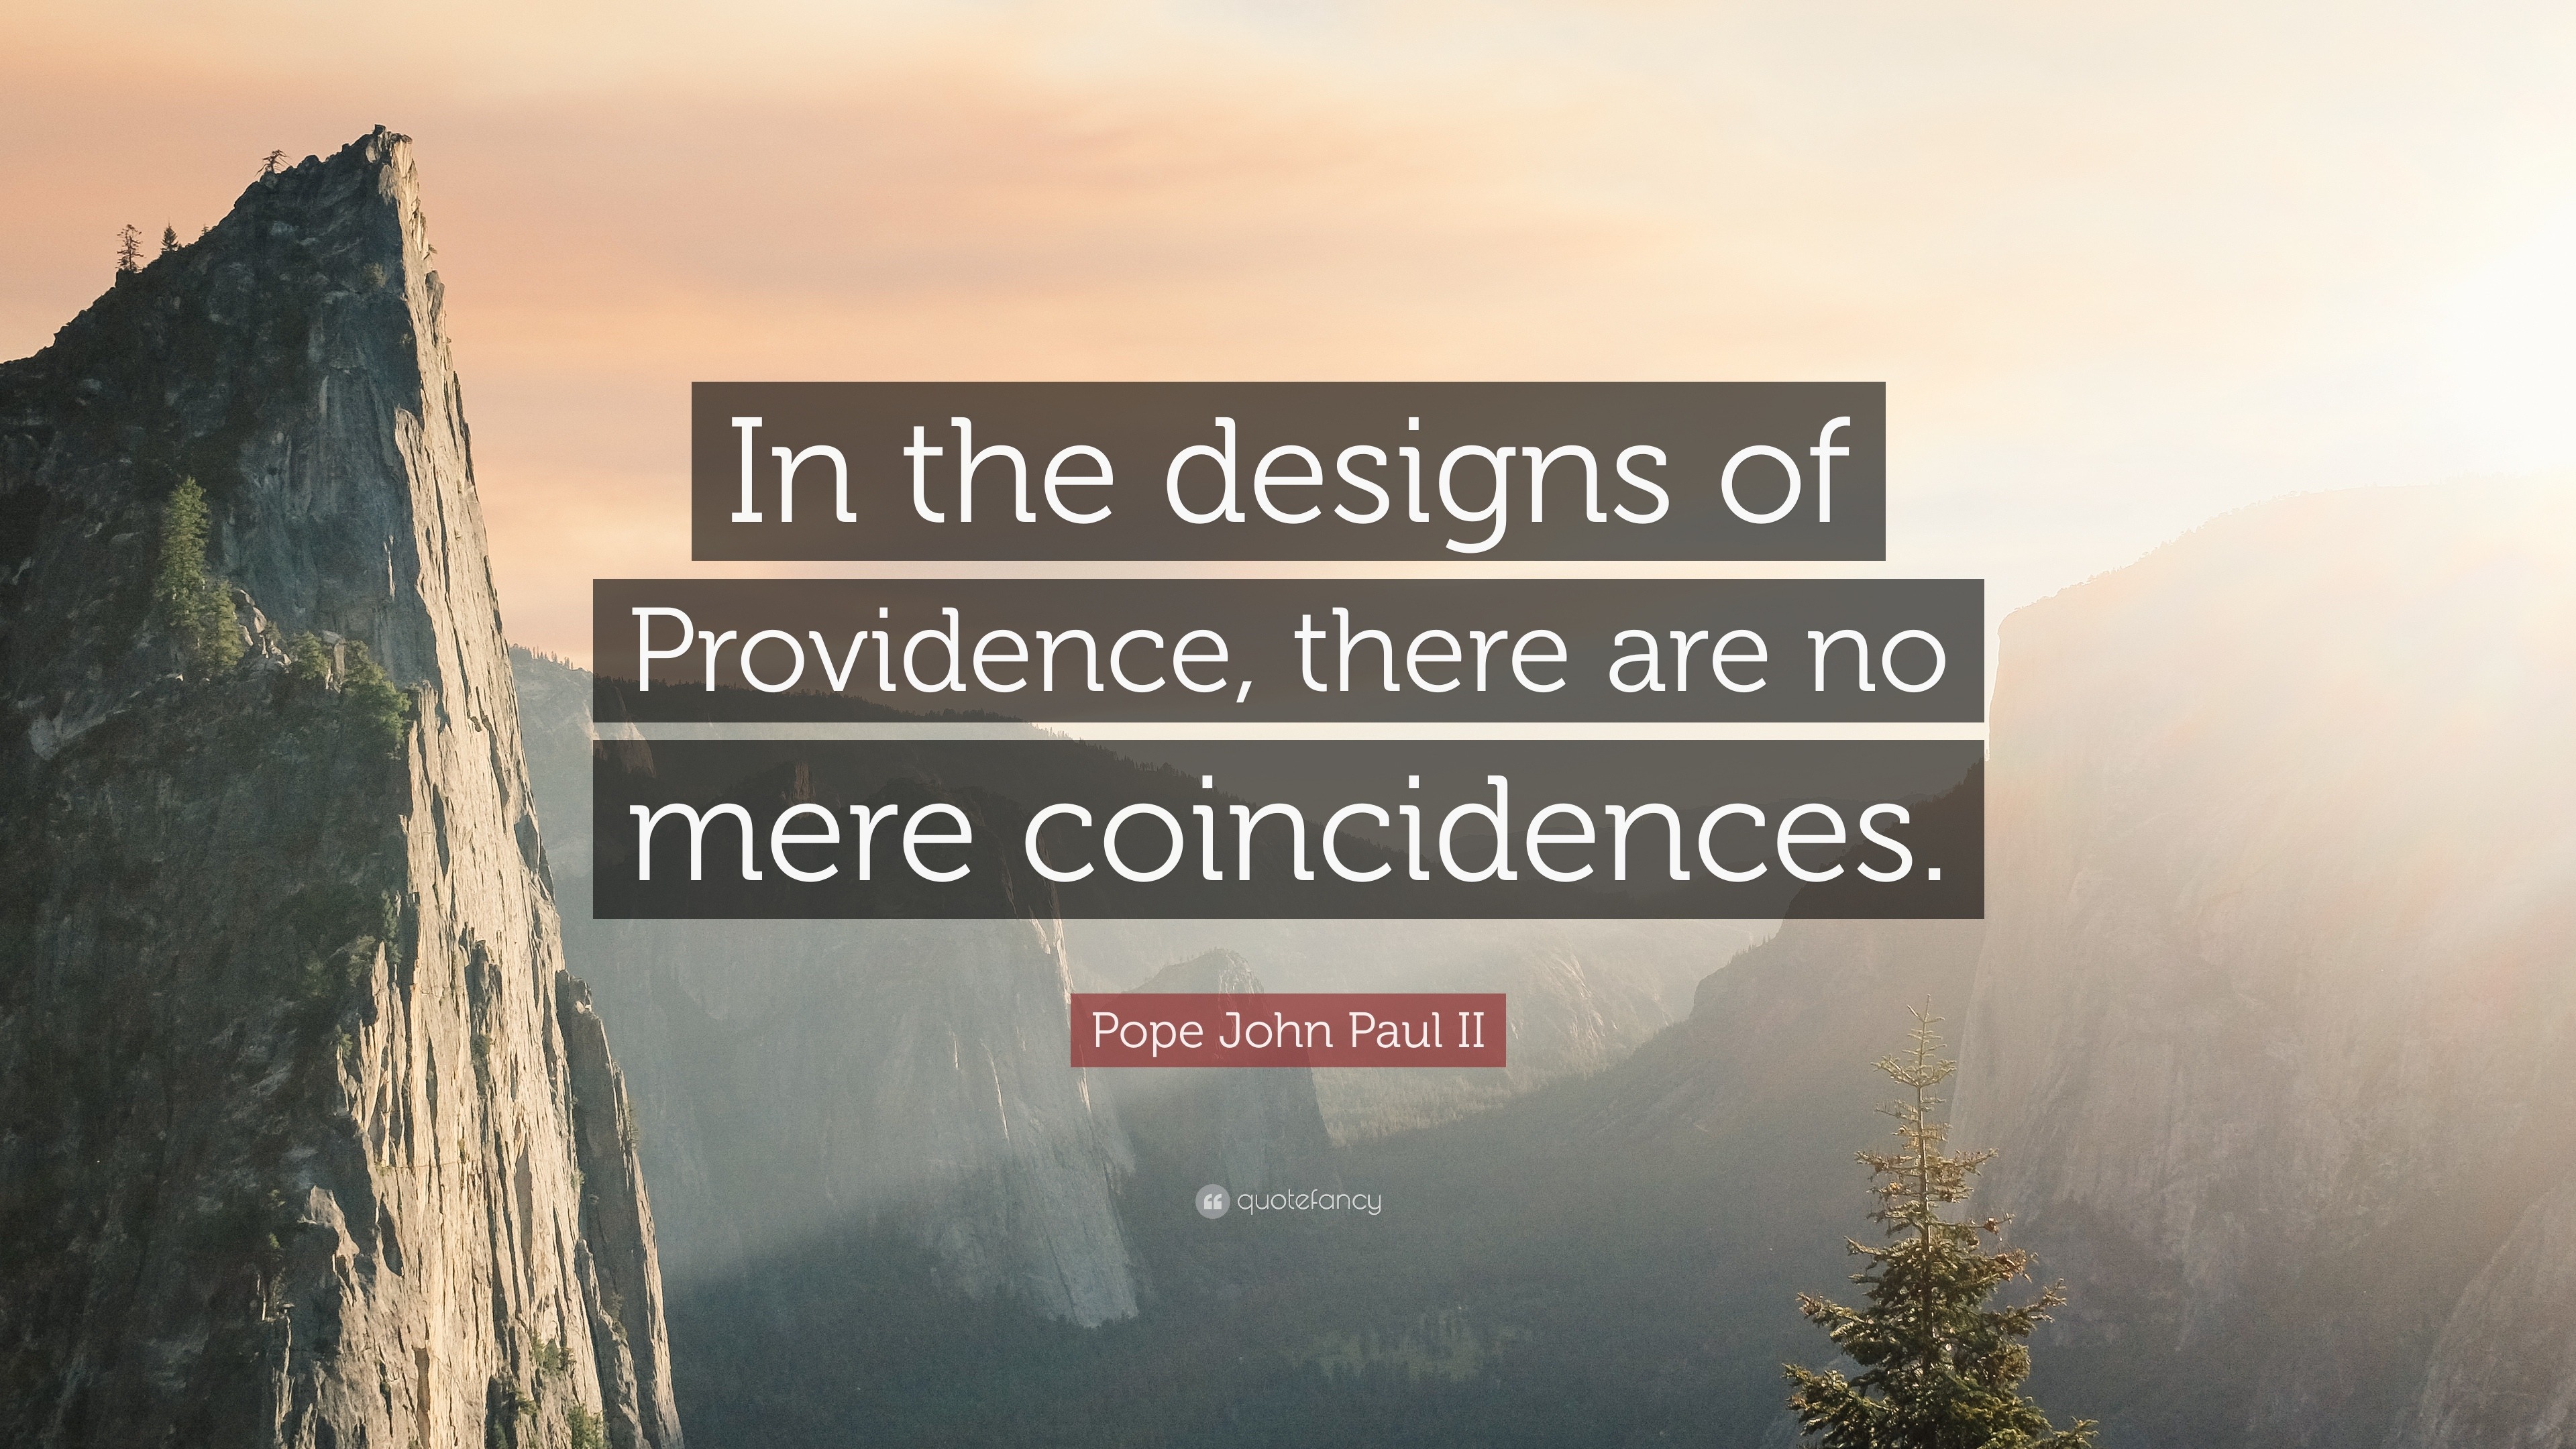 Pope John Paul II Quote: “In the designs of Providence, there are no mere  coincidences.”